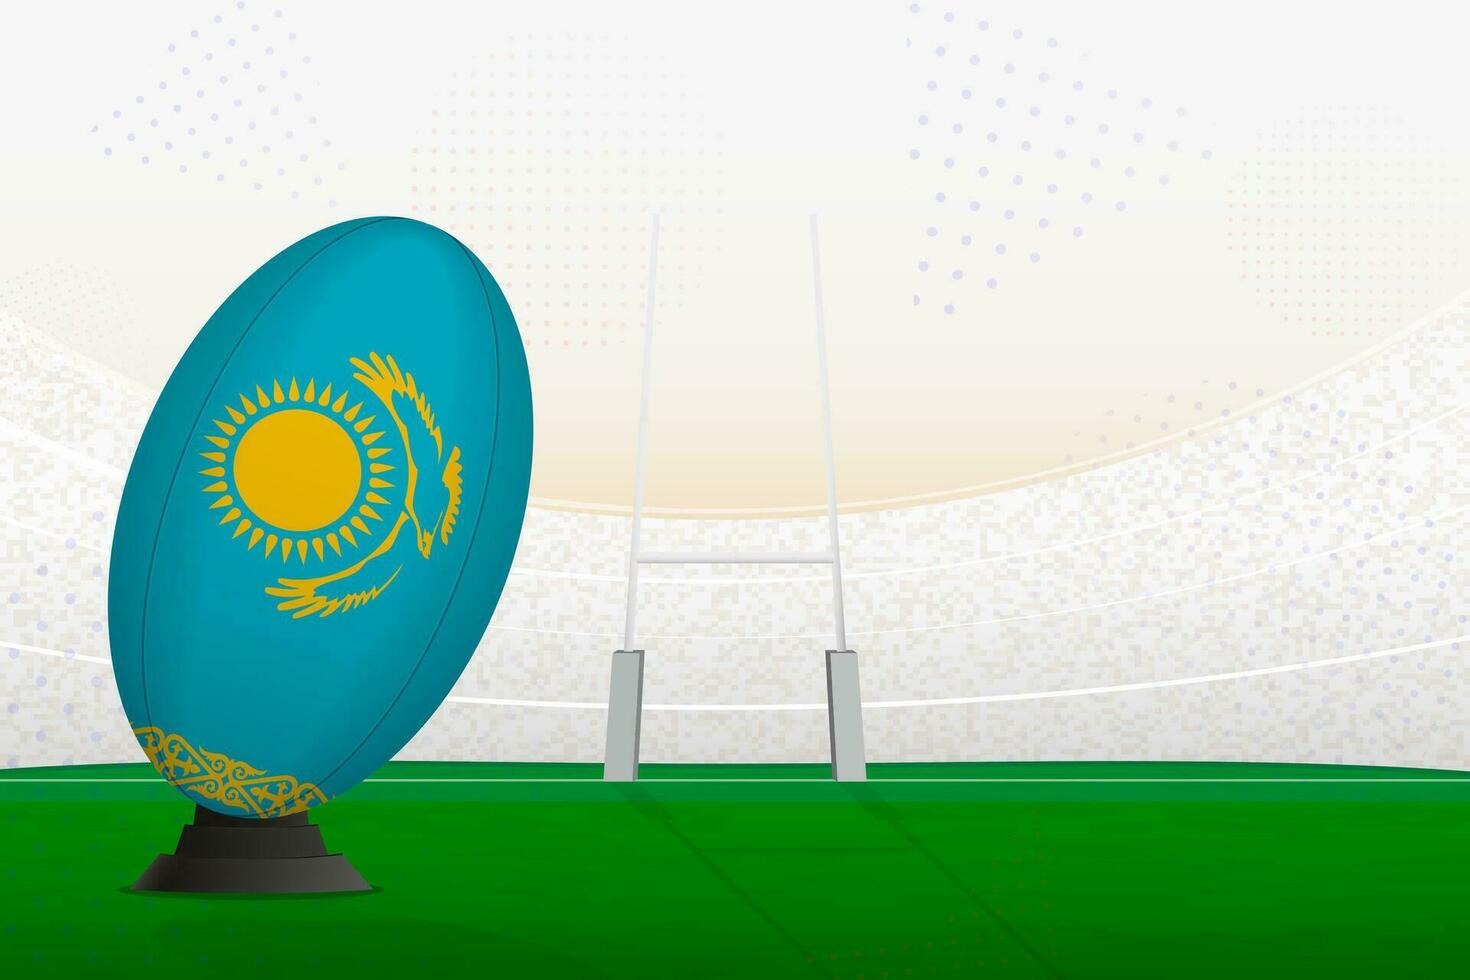 Kazakhstan national team rugby ball on rugby stadium and goal posts, preparing for a penalty or free kick. vector